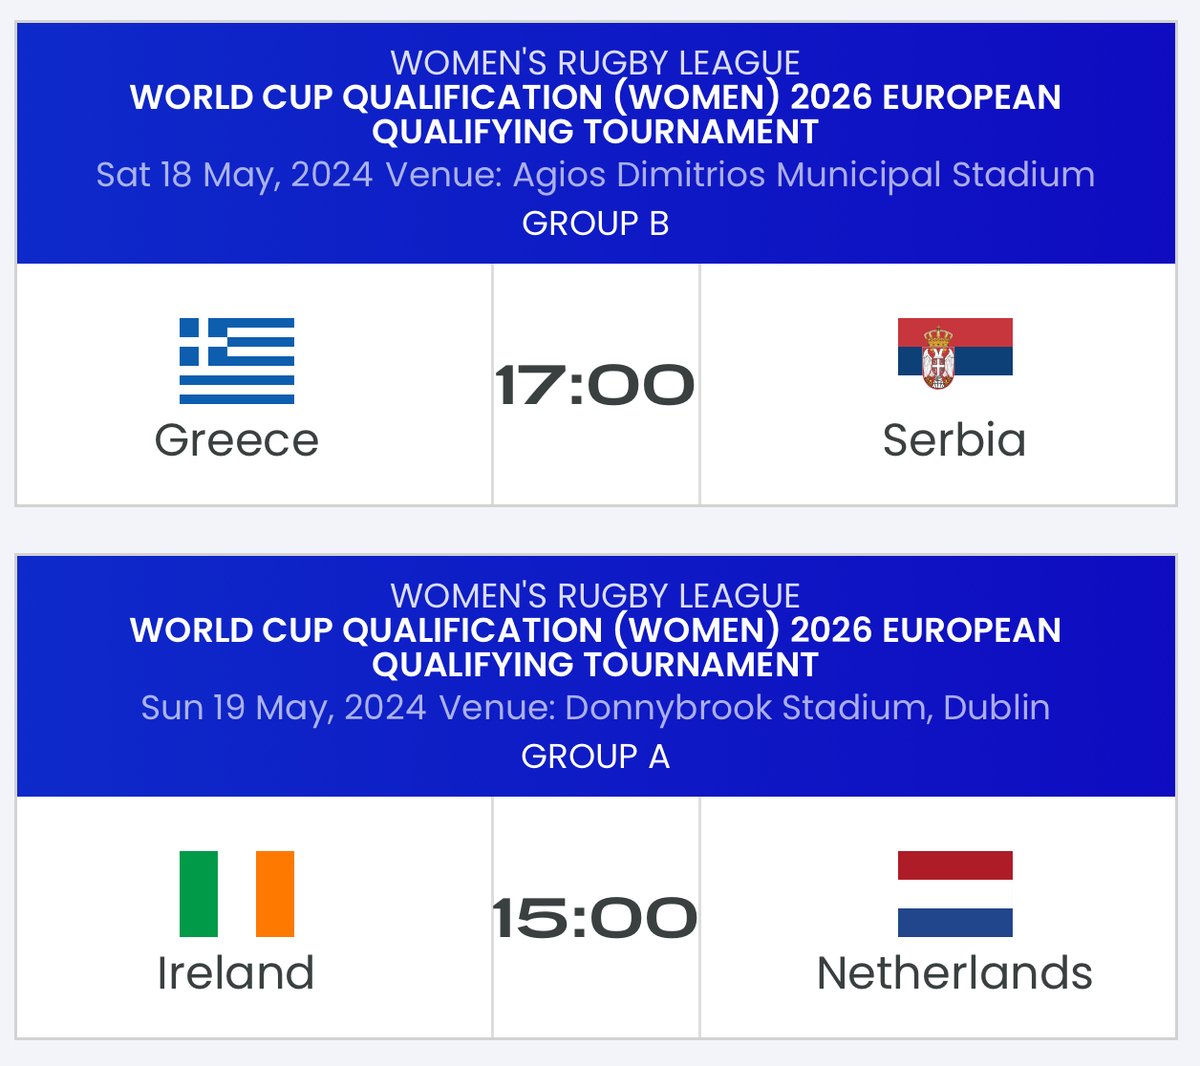 The next qualifying matches for RLWC2026 will take place this weekend. 🇬🇷v🇷🇸 🇮🇪v🇳🇱